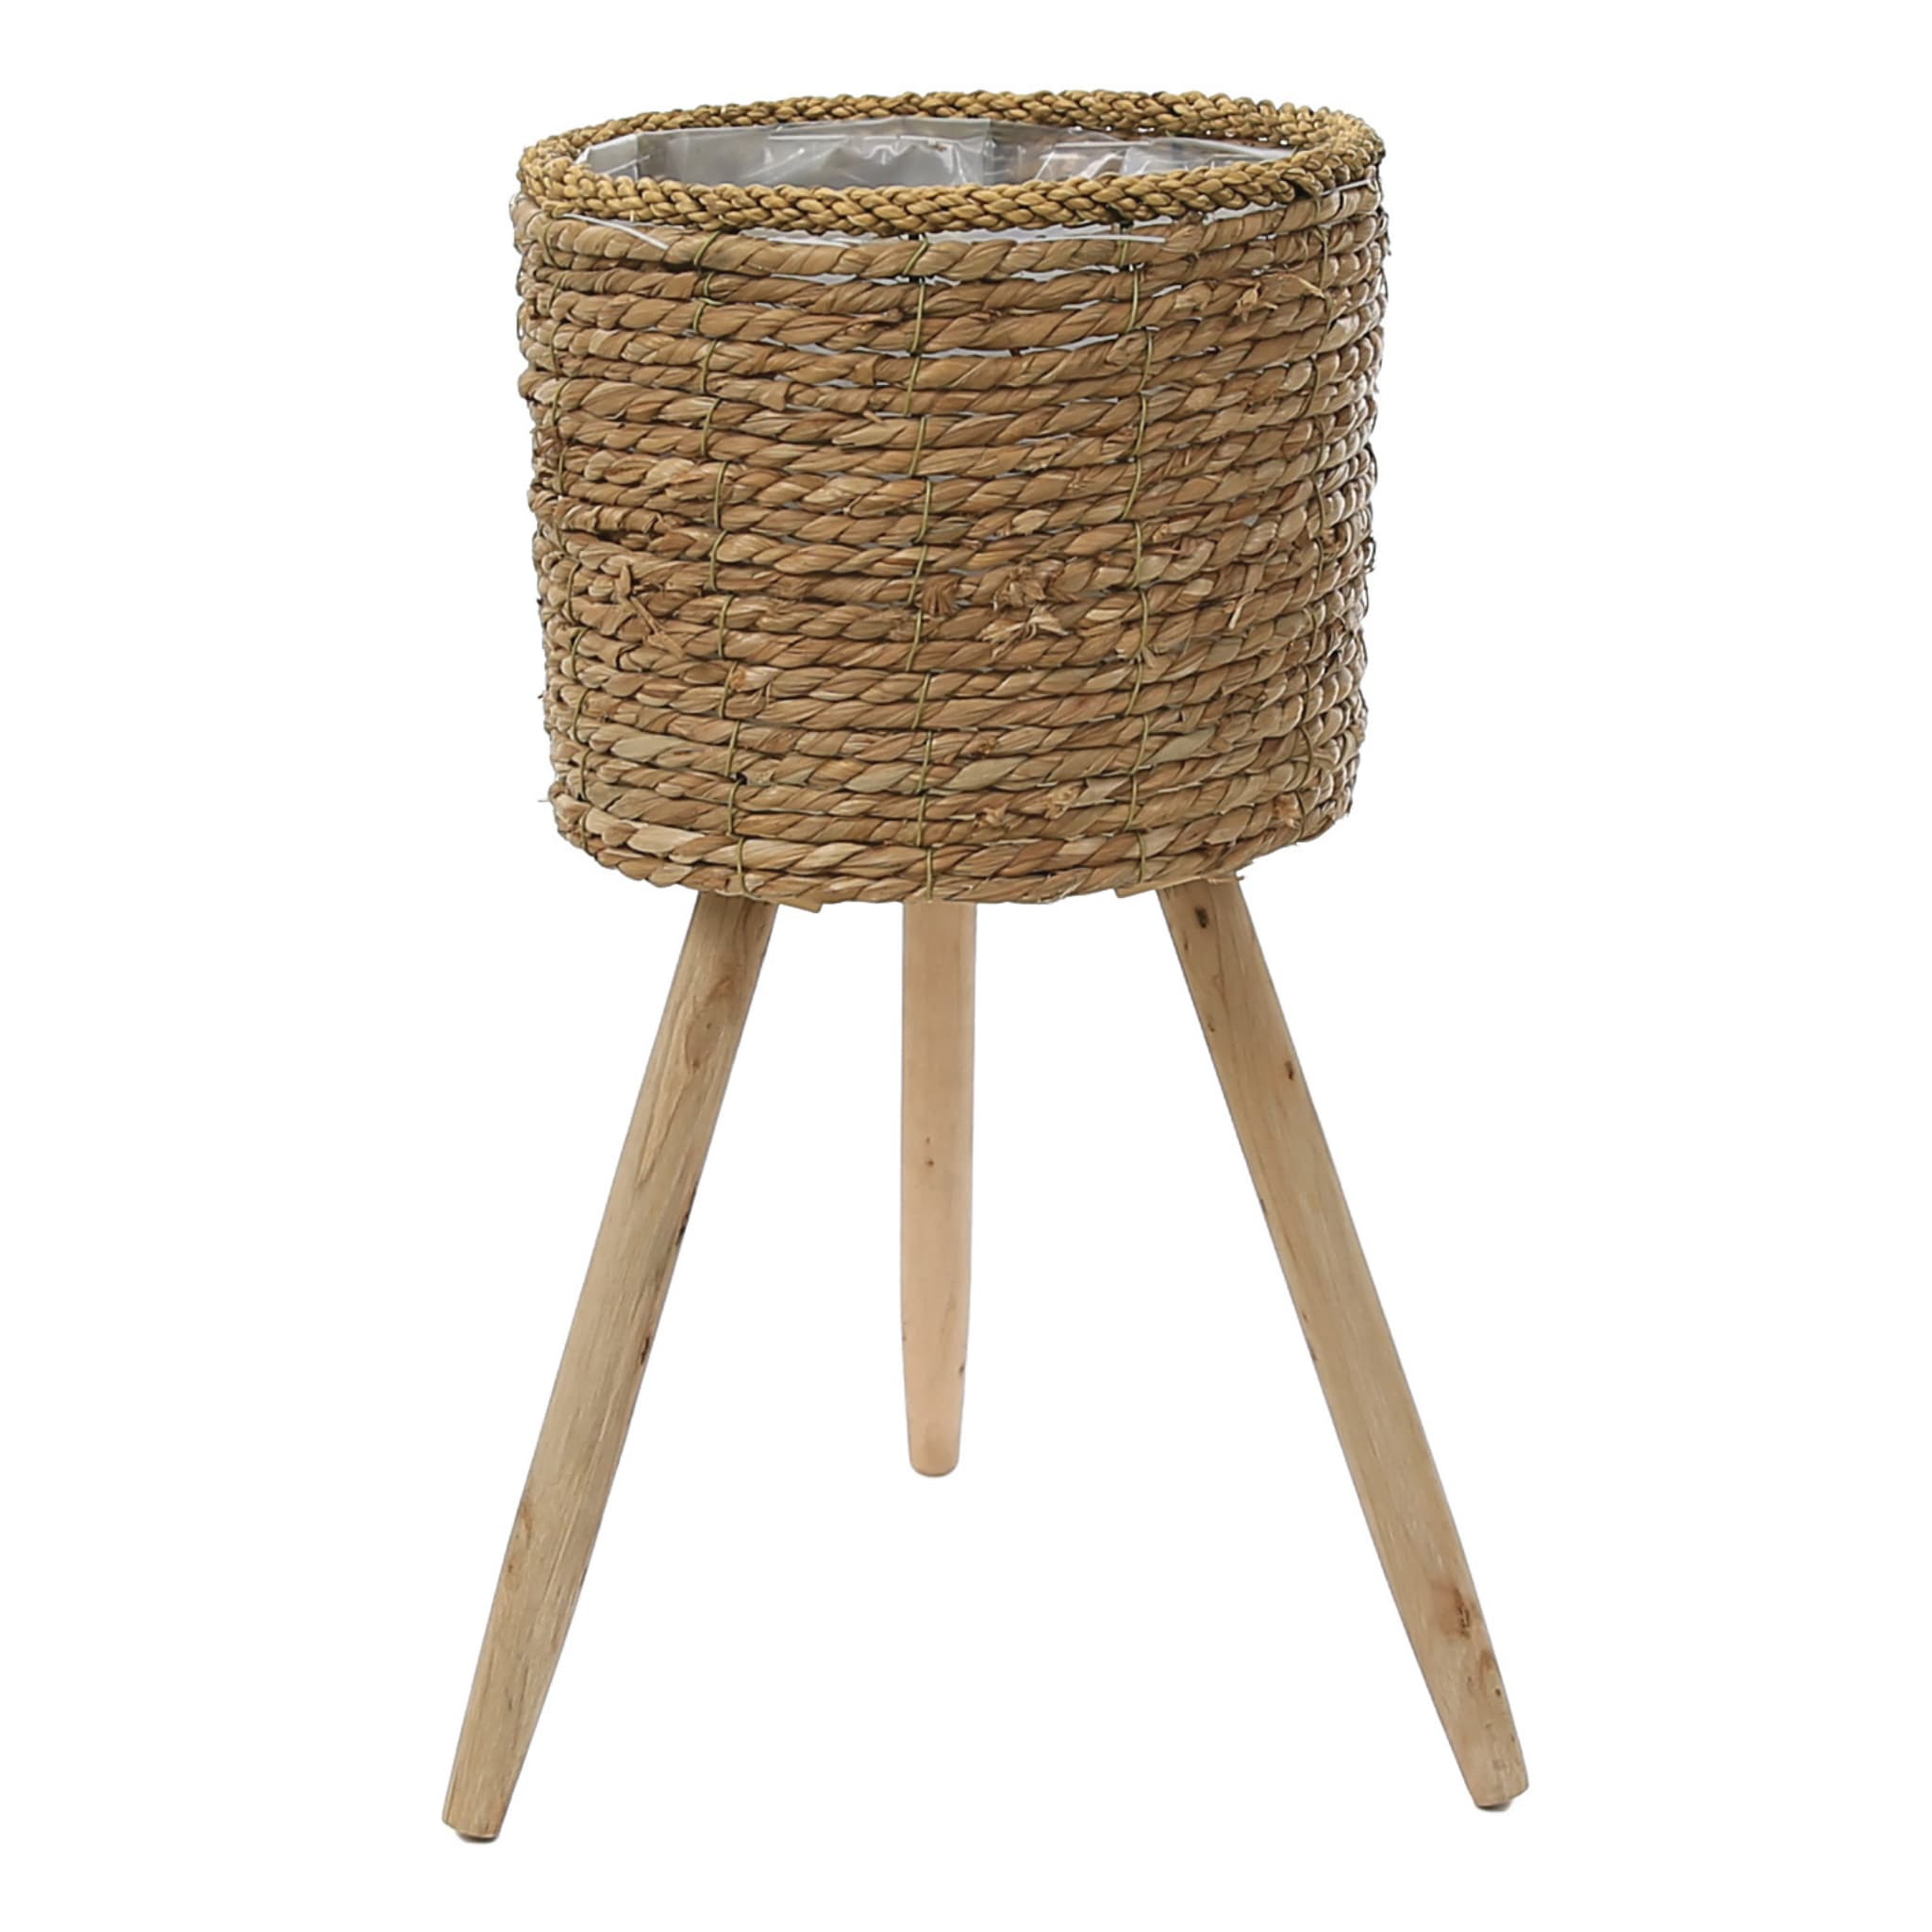 Woven Basket Indoor Plant Pot with Wooden Legs   18 Sizes